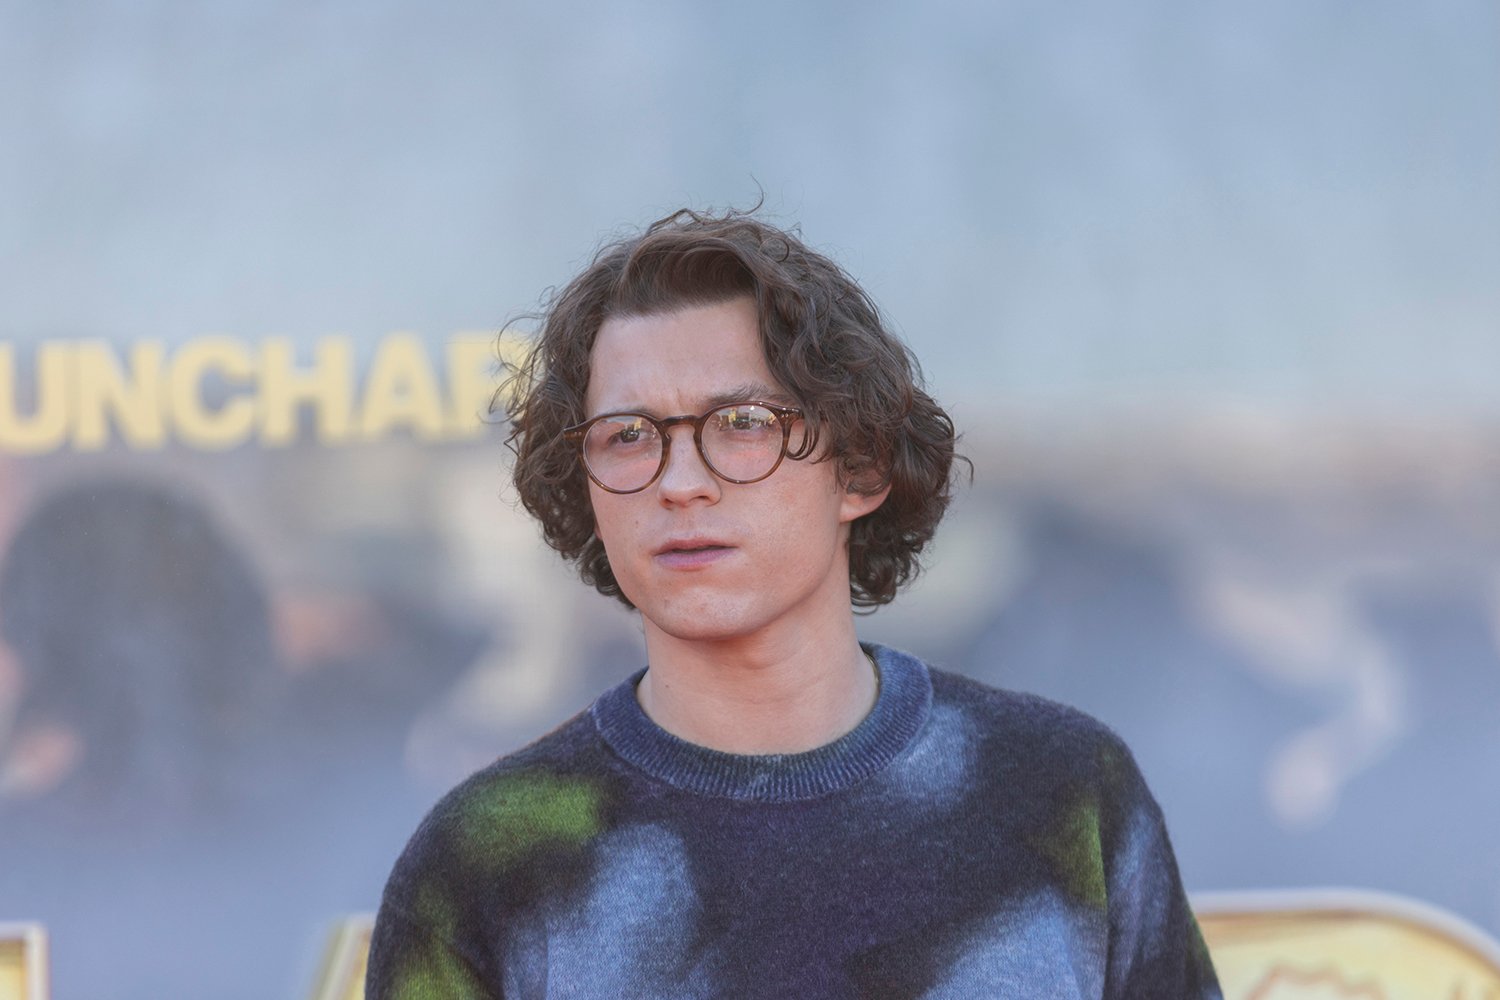 Tom Holland at a press event for his new movie Uncharted